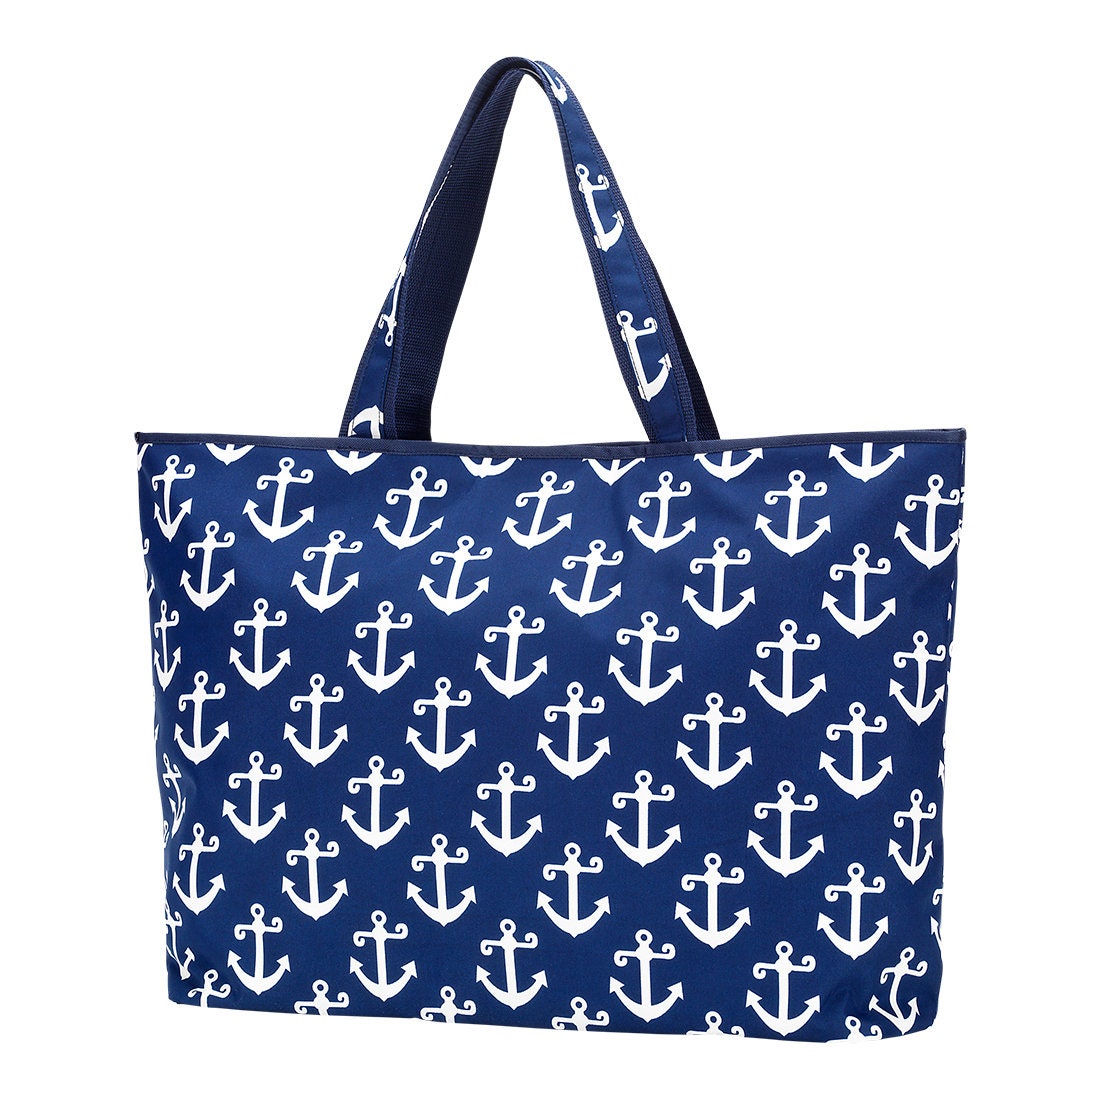 Navy Anchor Ally Tote Navy Anchor Tote Tote All Purpose | Etsy